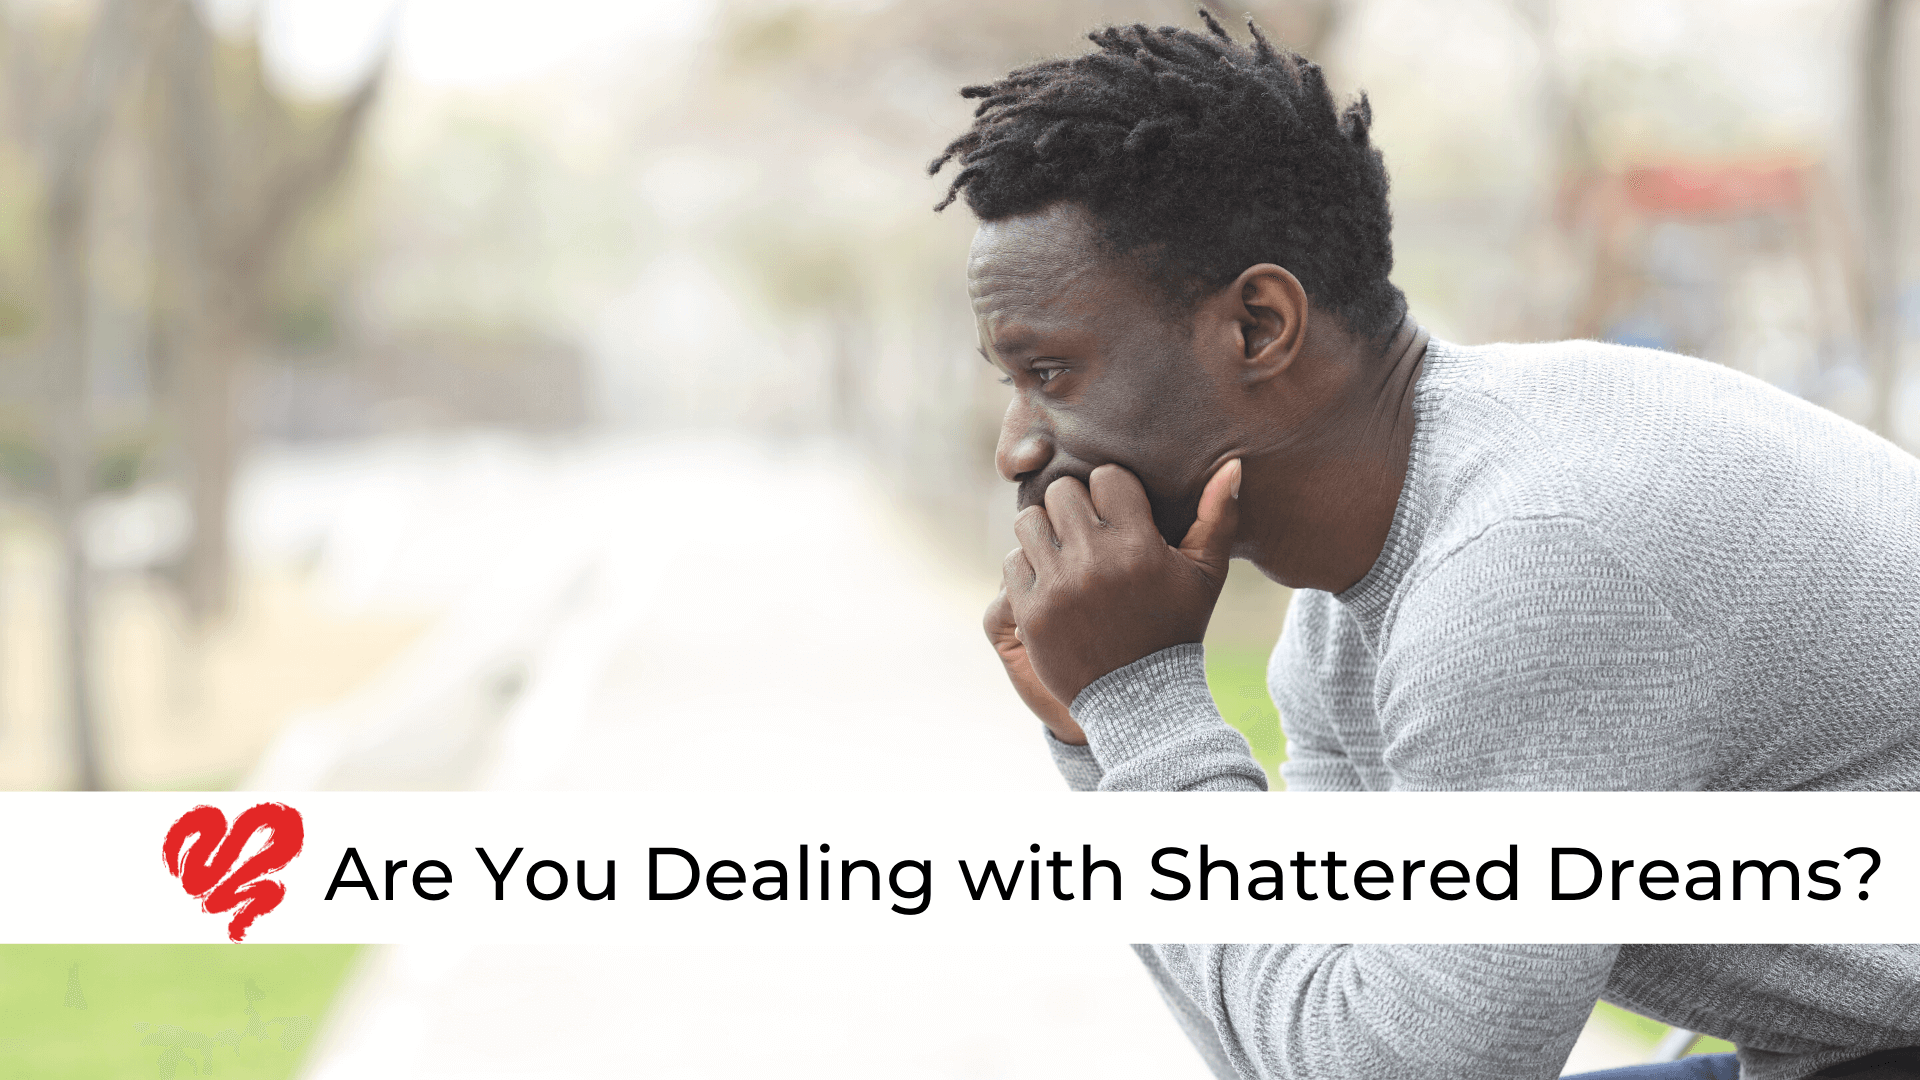 Are You Dealing With Shattered Dreams?